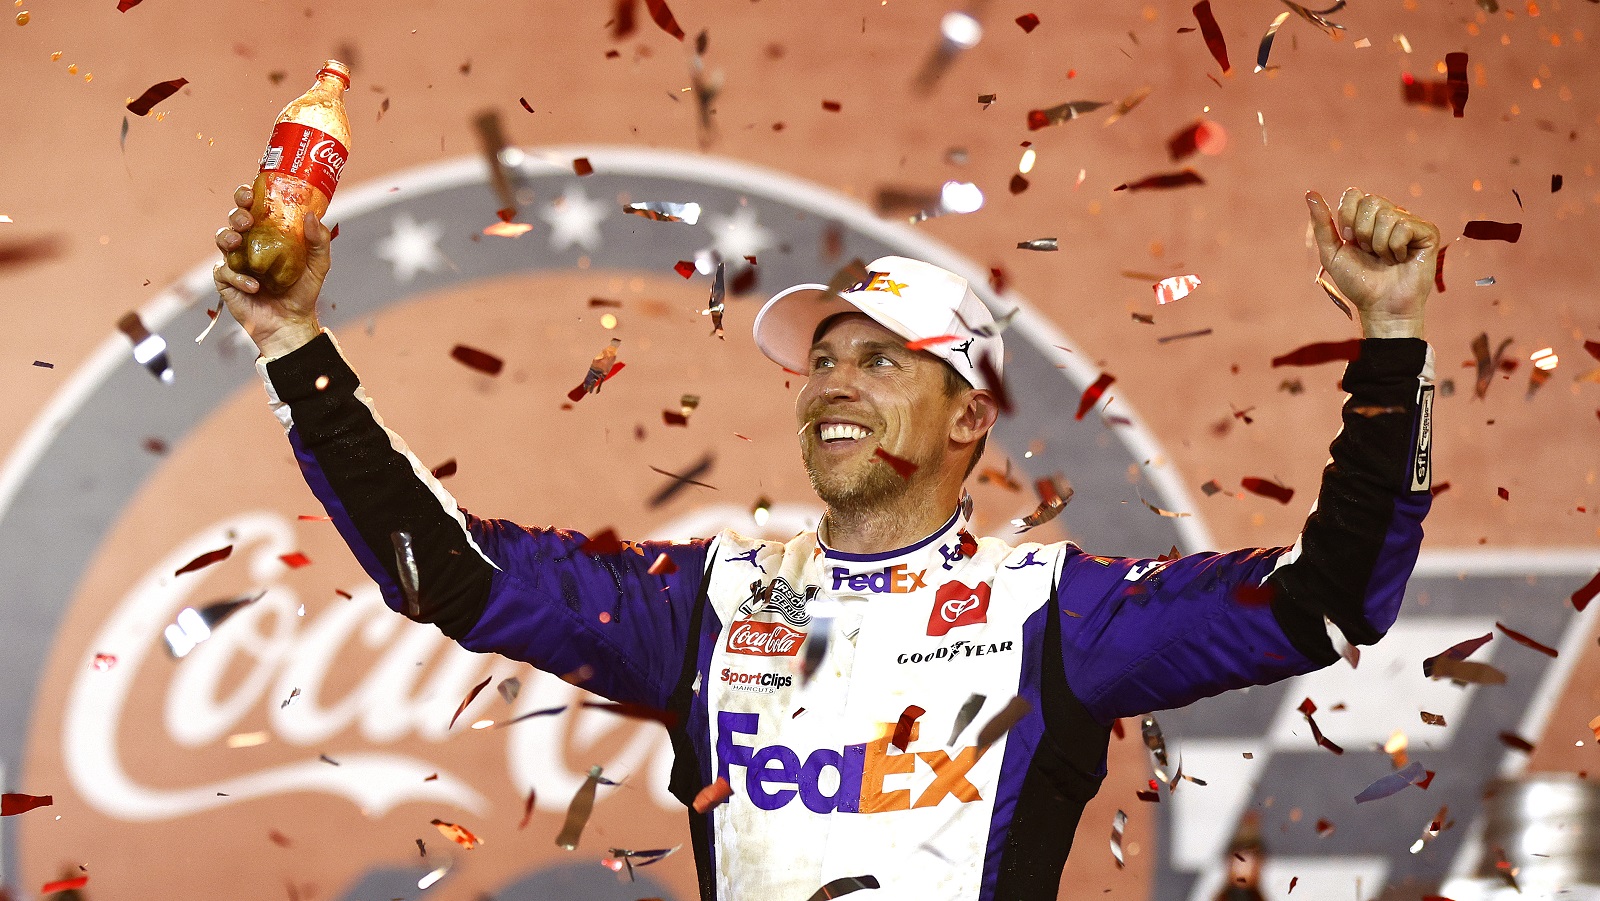 Denny Hamlin, driver of the No. 11 Toyota, celebrates after winning the NASCAR Cup Series Coca-Cola 600 at Charlotte Motor Speedway on May 29, 2022.